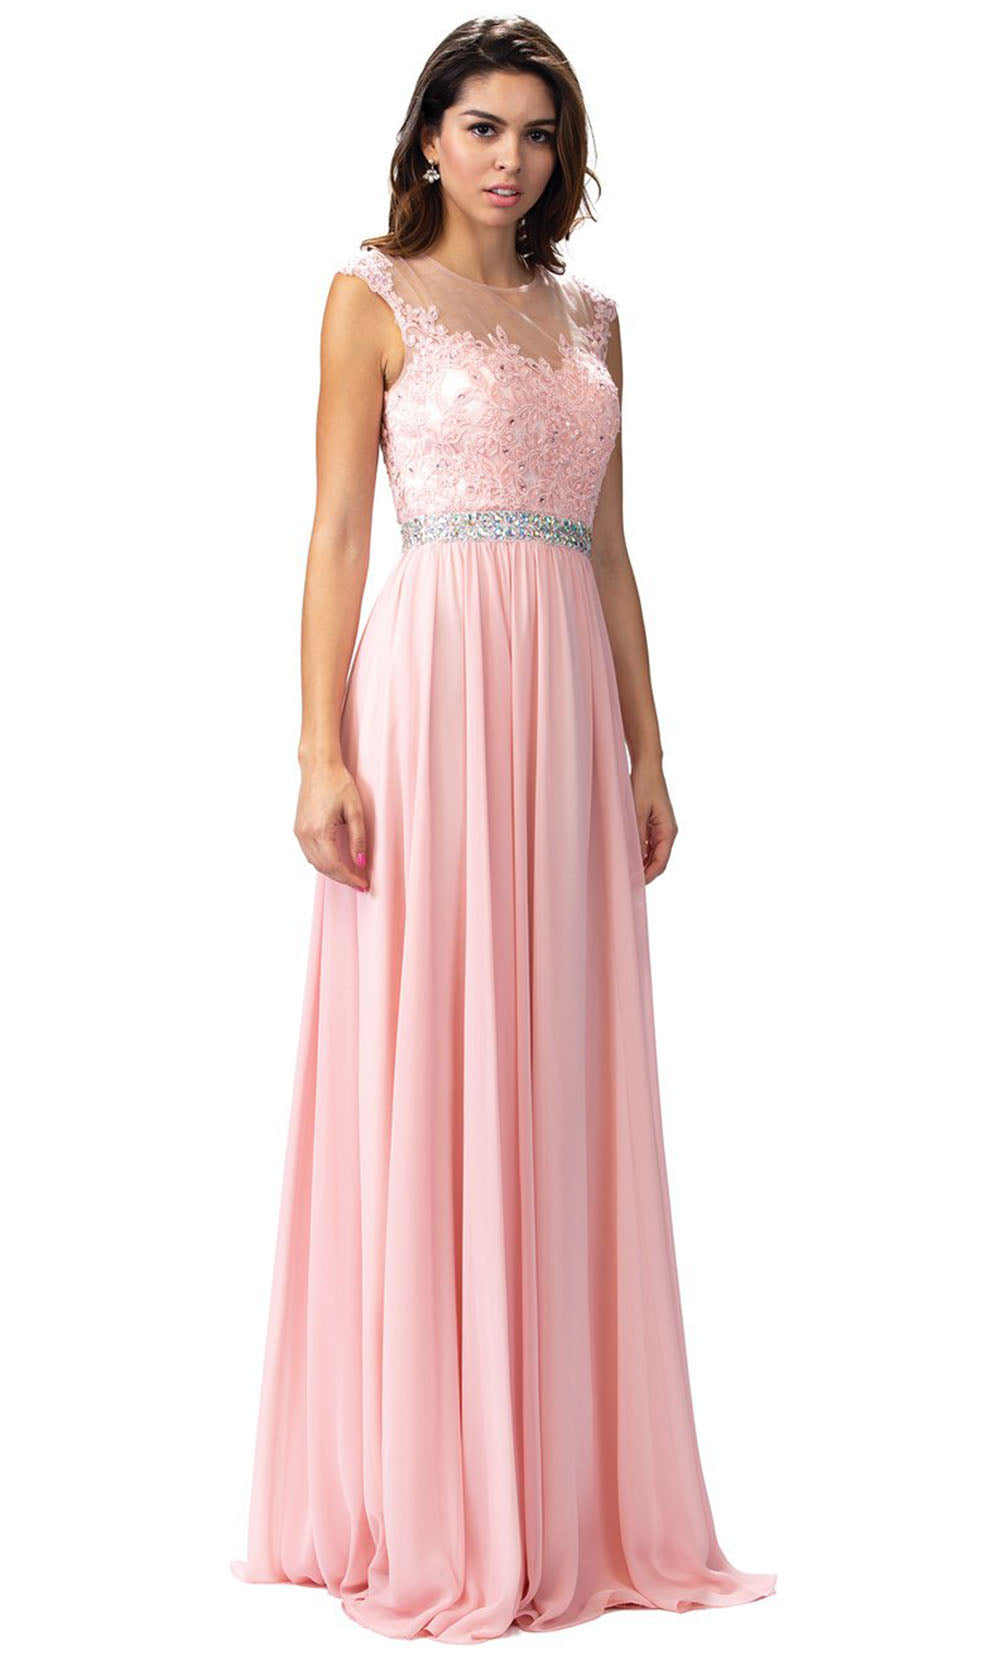 Blush Dancing Queen 9400 Beaded Lace Illusion Neckline A Line Gown Long A Line Dress 4284